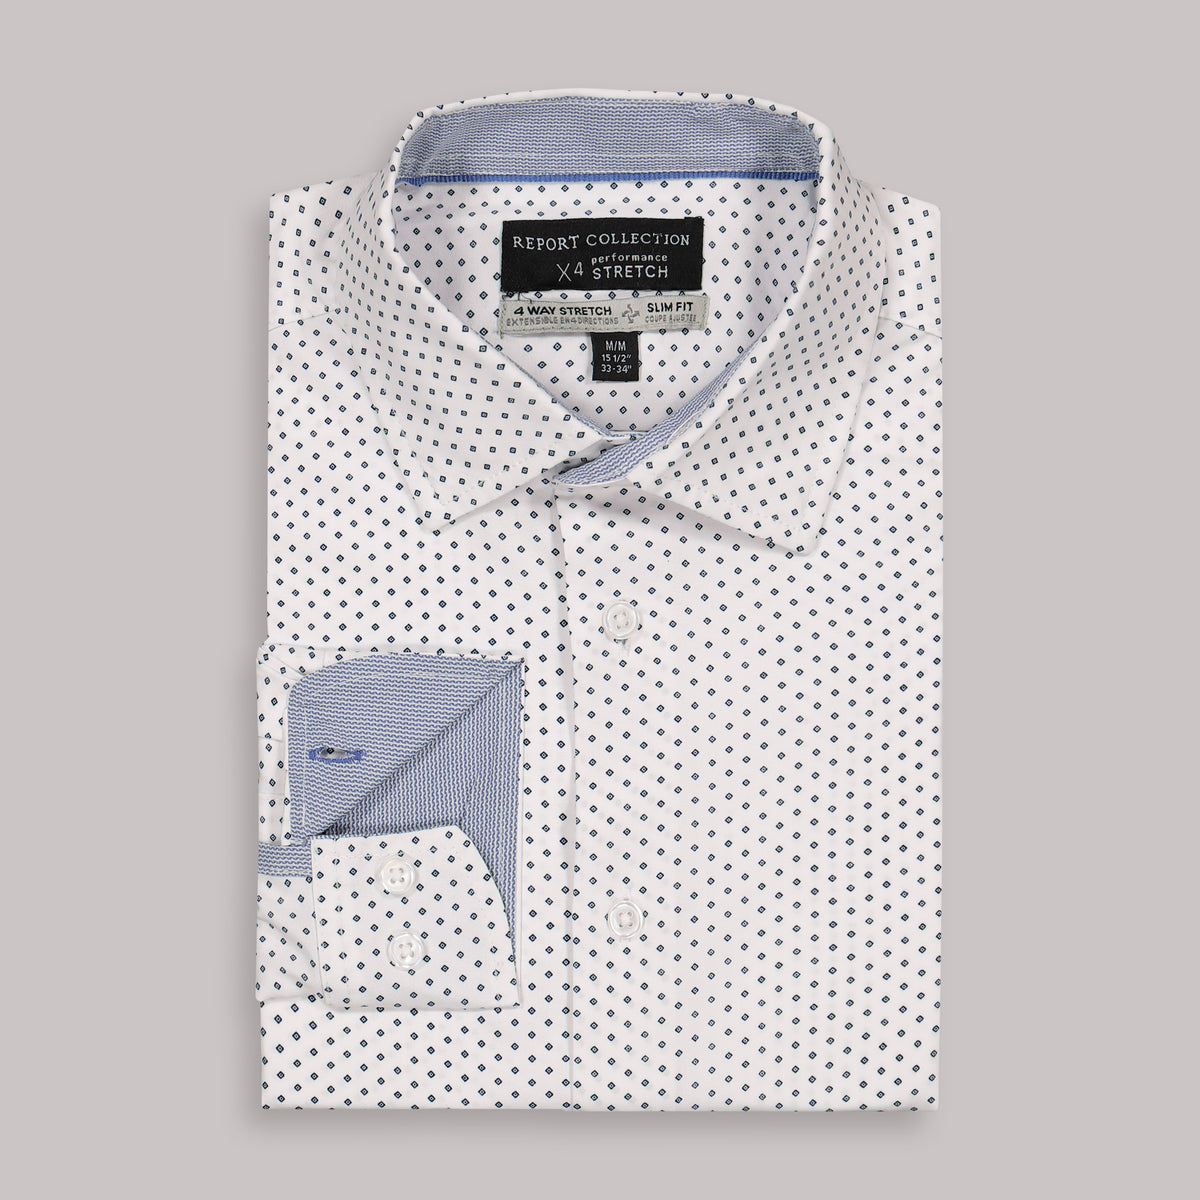 Folded View of Long Sleeve 4-Way Dress Shirt with Diamond Print in White